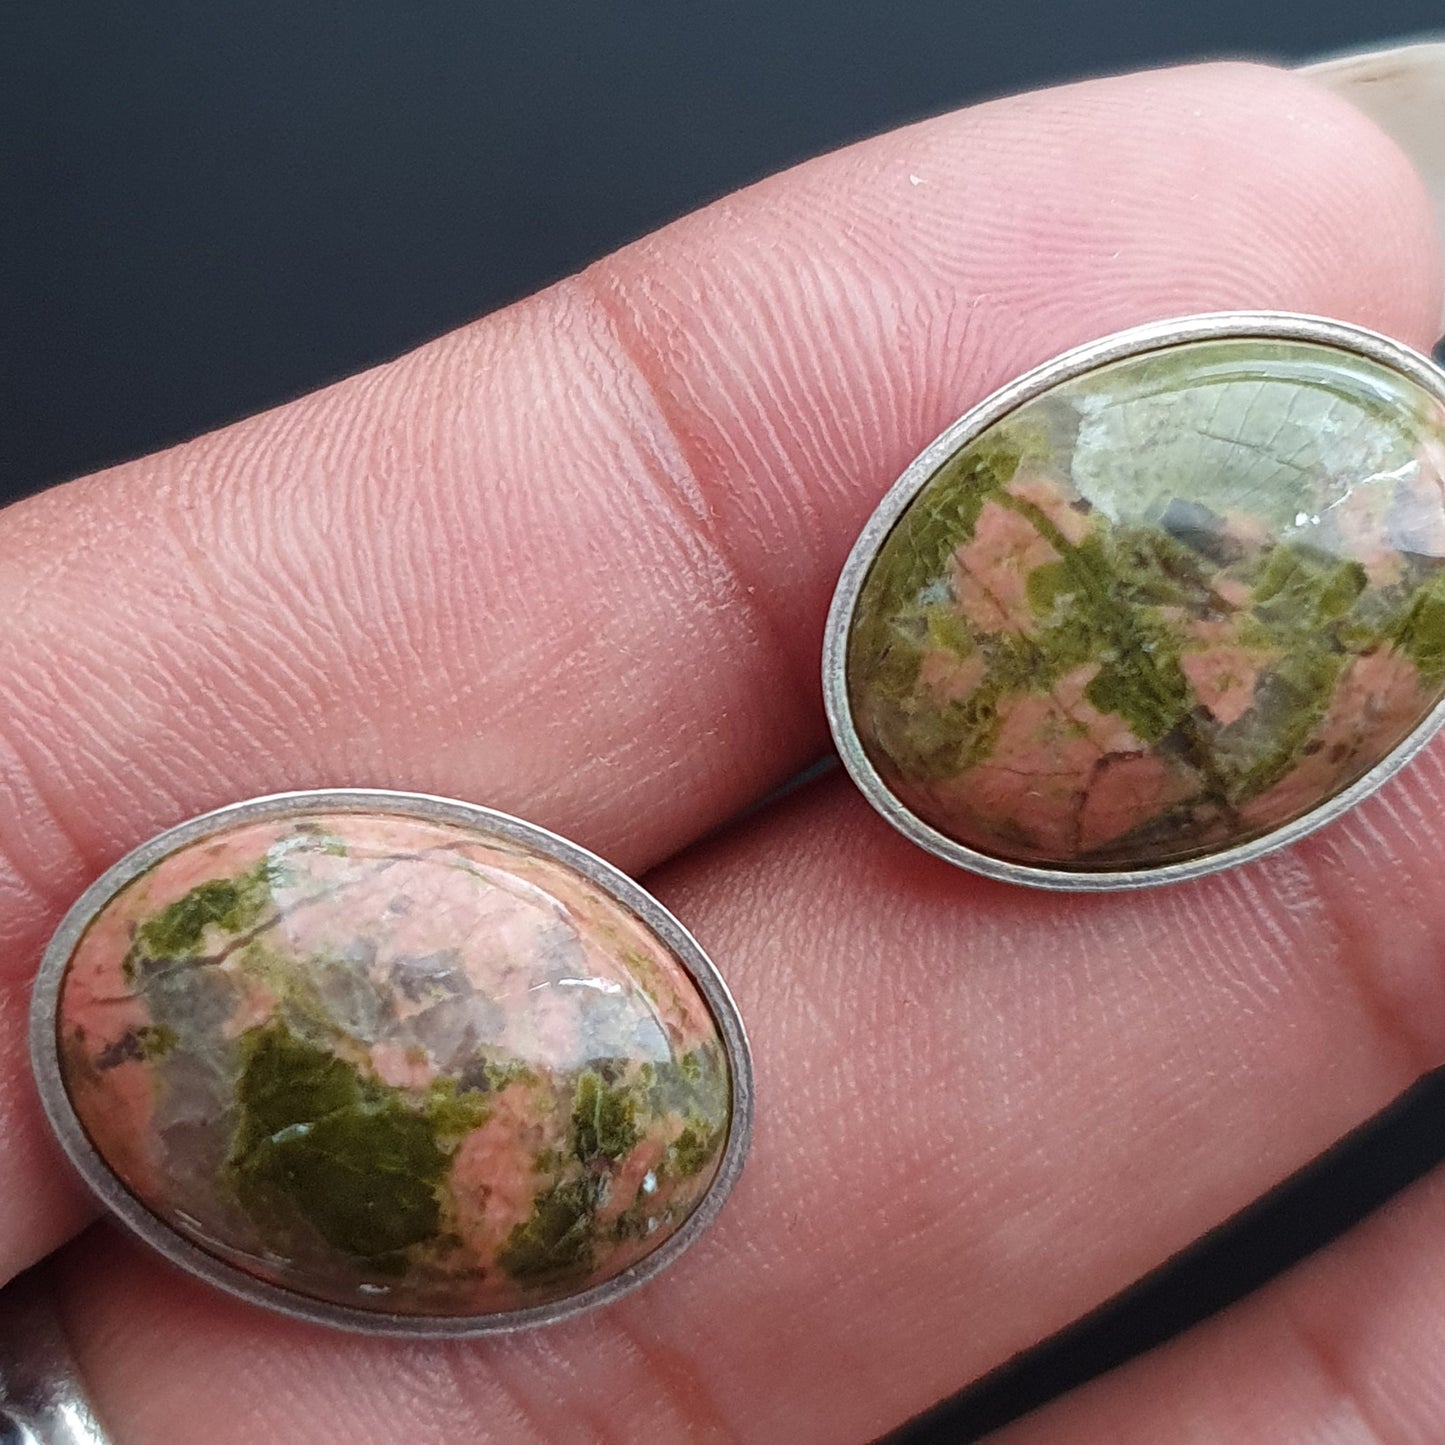 Stud earrings, unakite gemstone, sterling silver, oval,vintage jewelry, unique,gifts,classical, Victorian, dainty jewellery,handmade jewelry